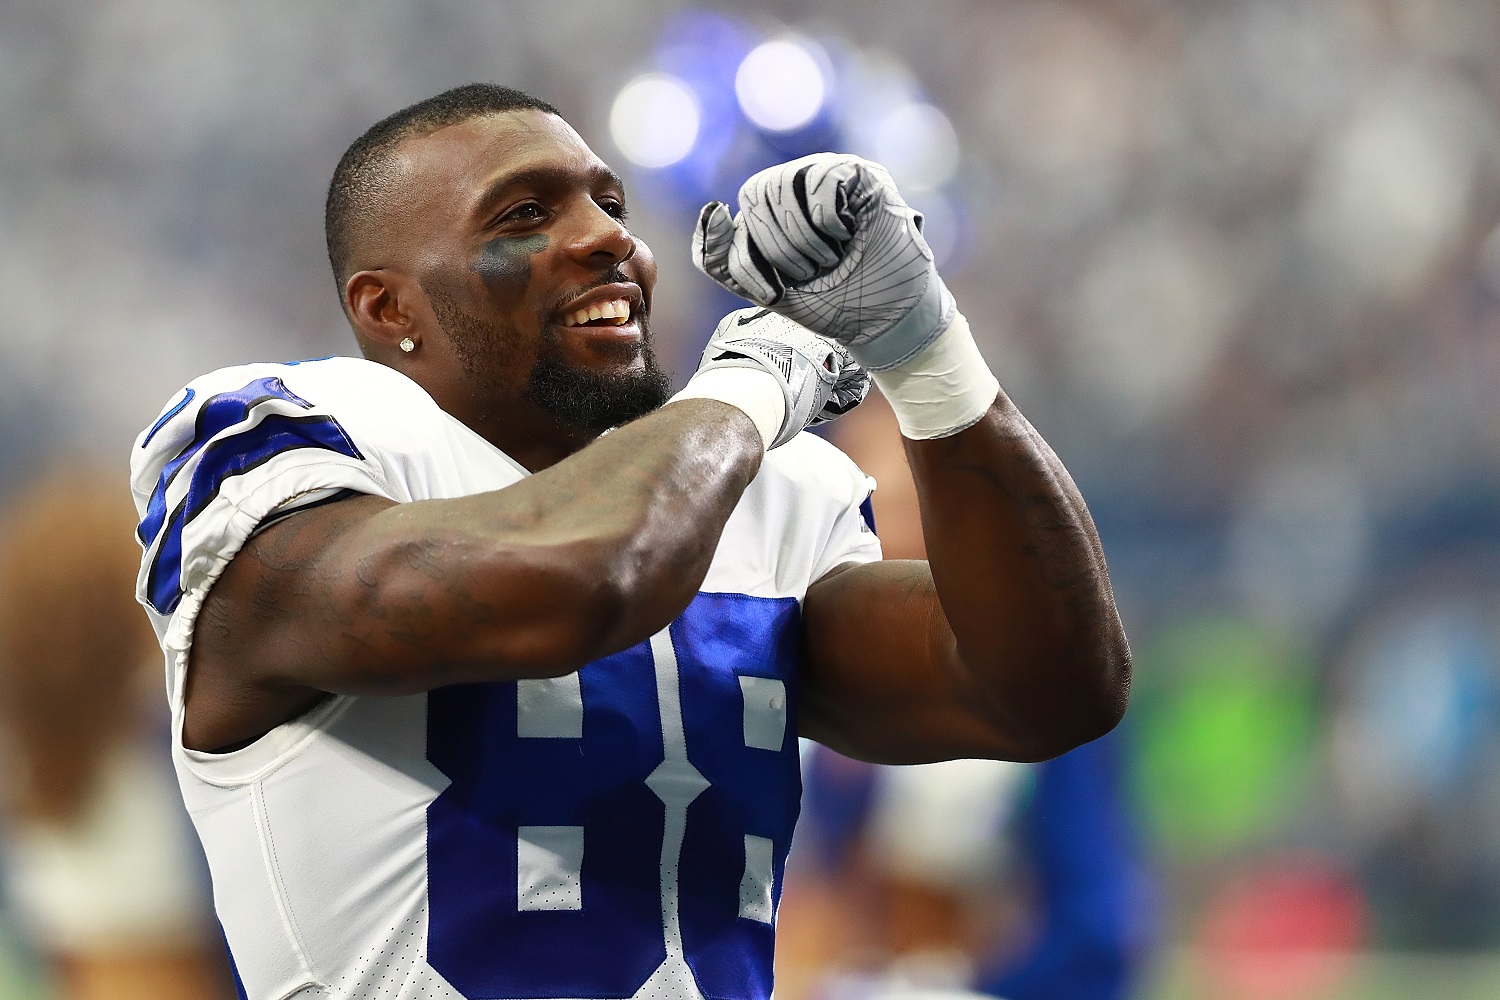 How Many Touchdowns Did Dez Bryant Score for the Dallas Cowboys?